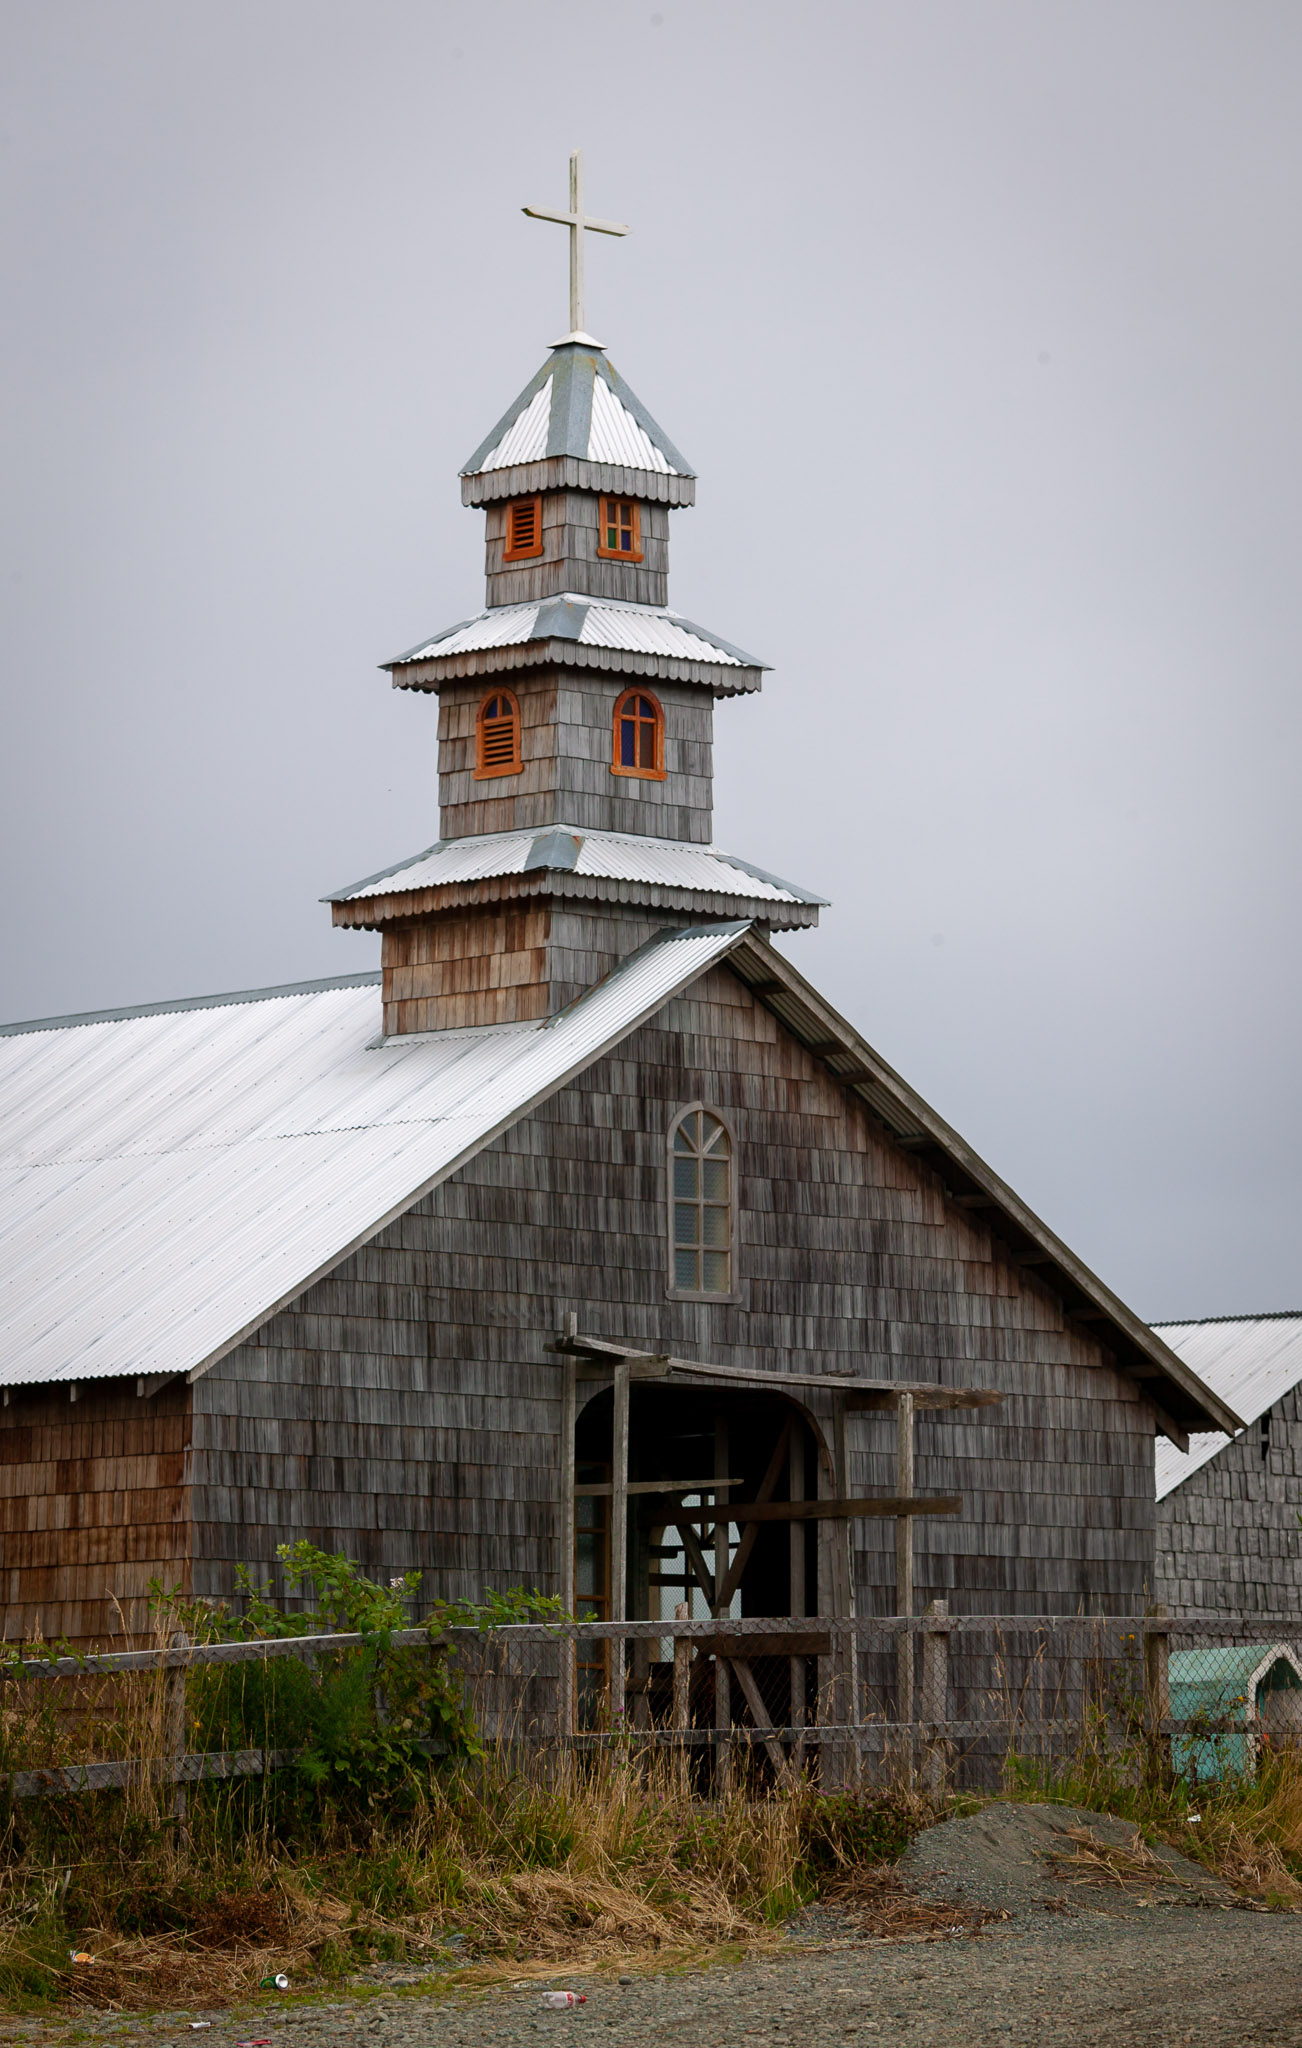 One of Chiloe's famous wooden churches